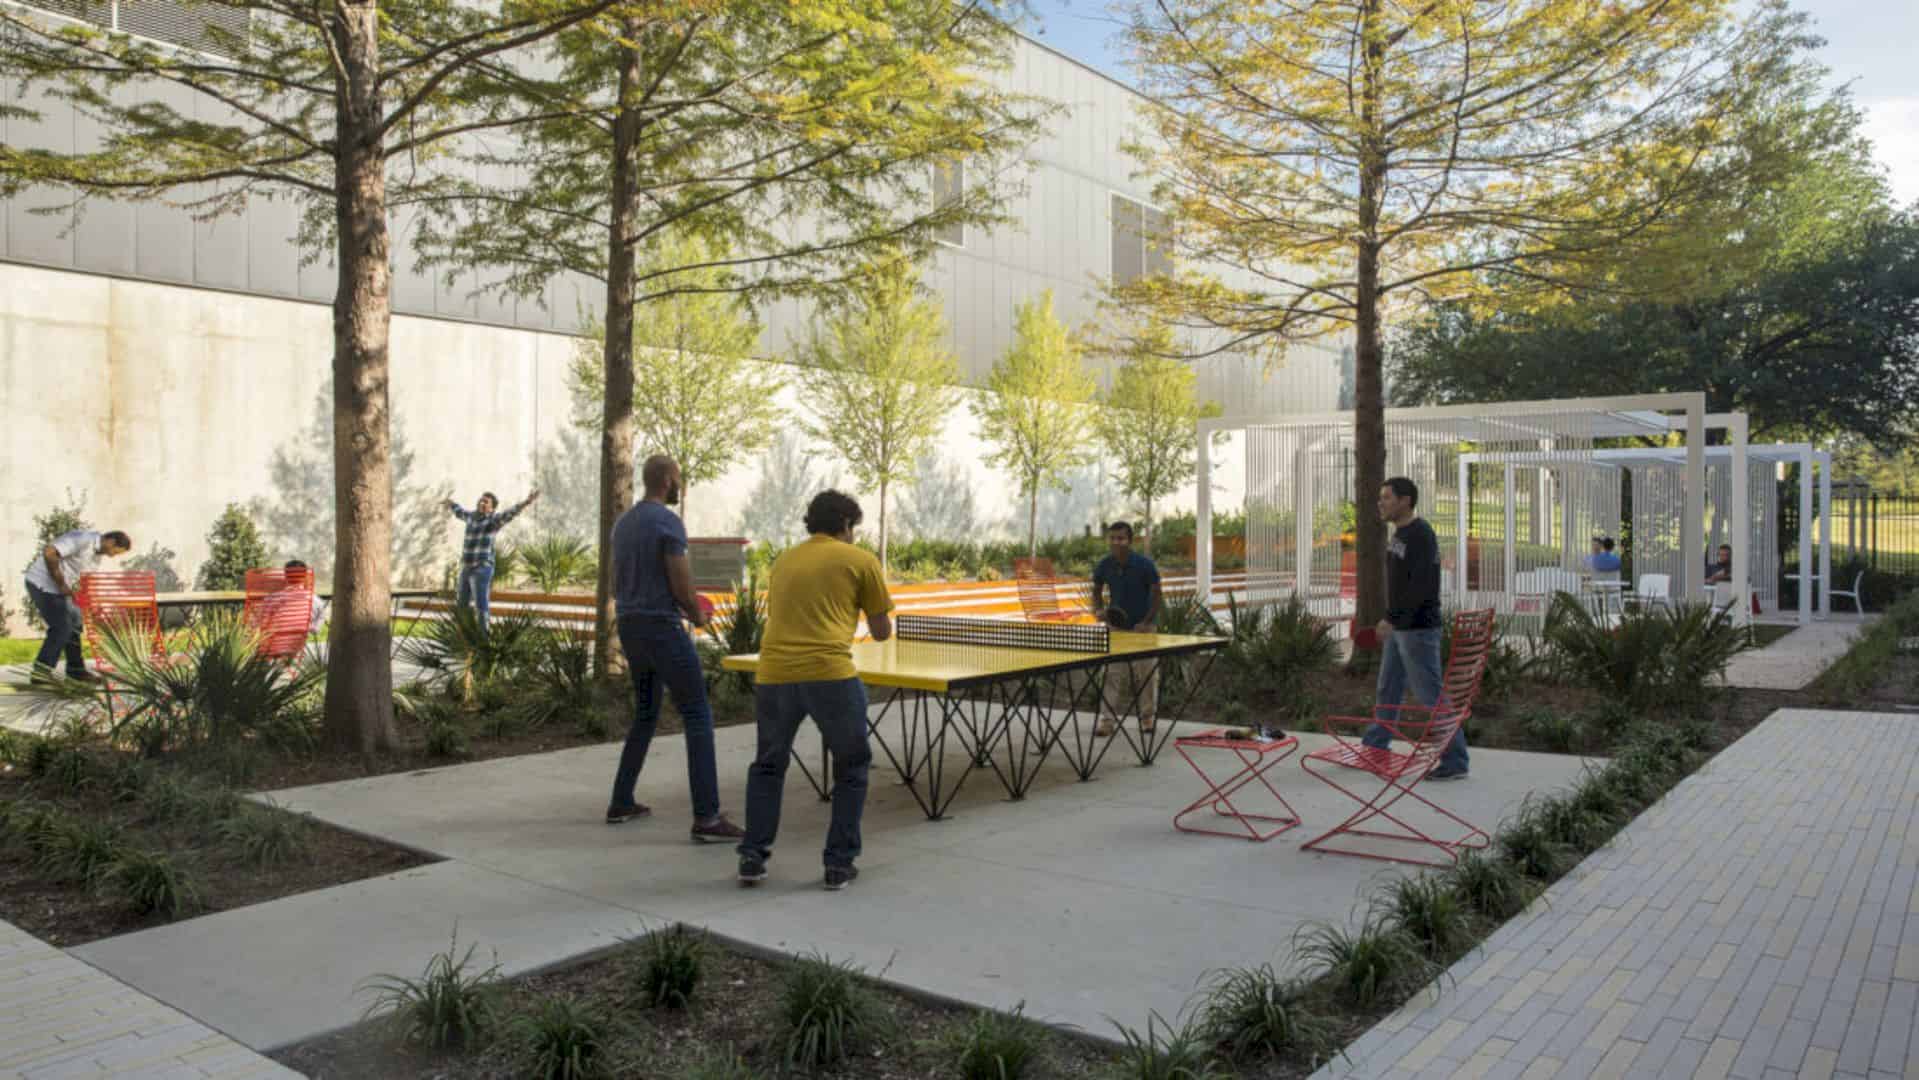 Texas Instruments South Campus Energized And Usable Spaces For Employees Well Being 7